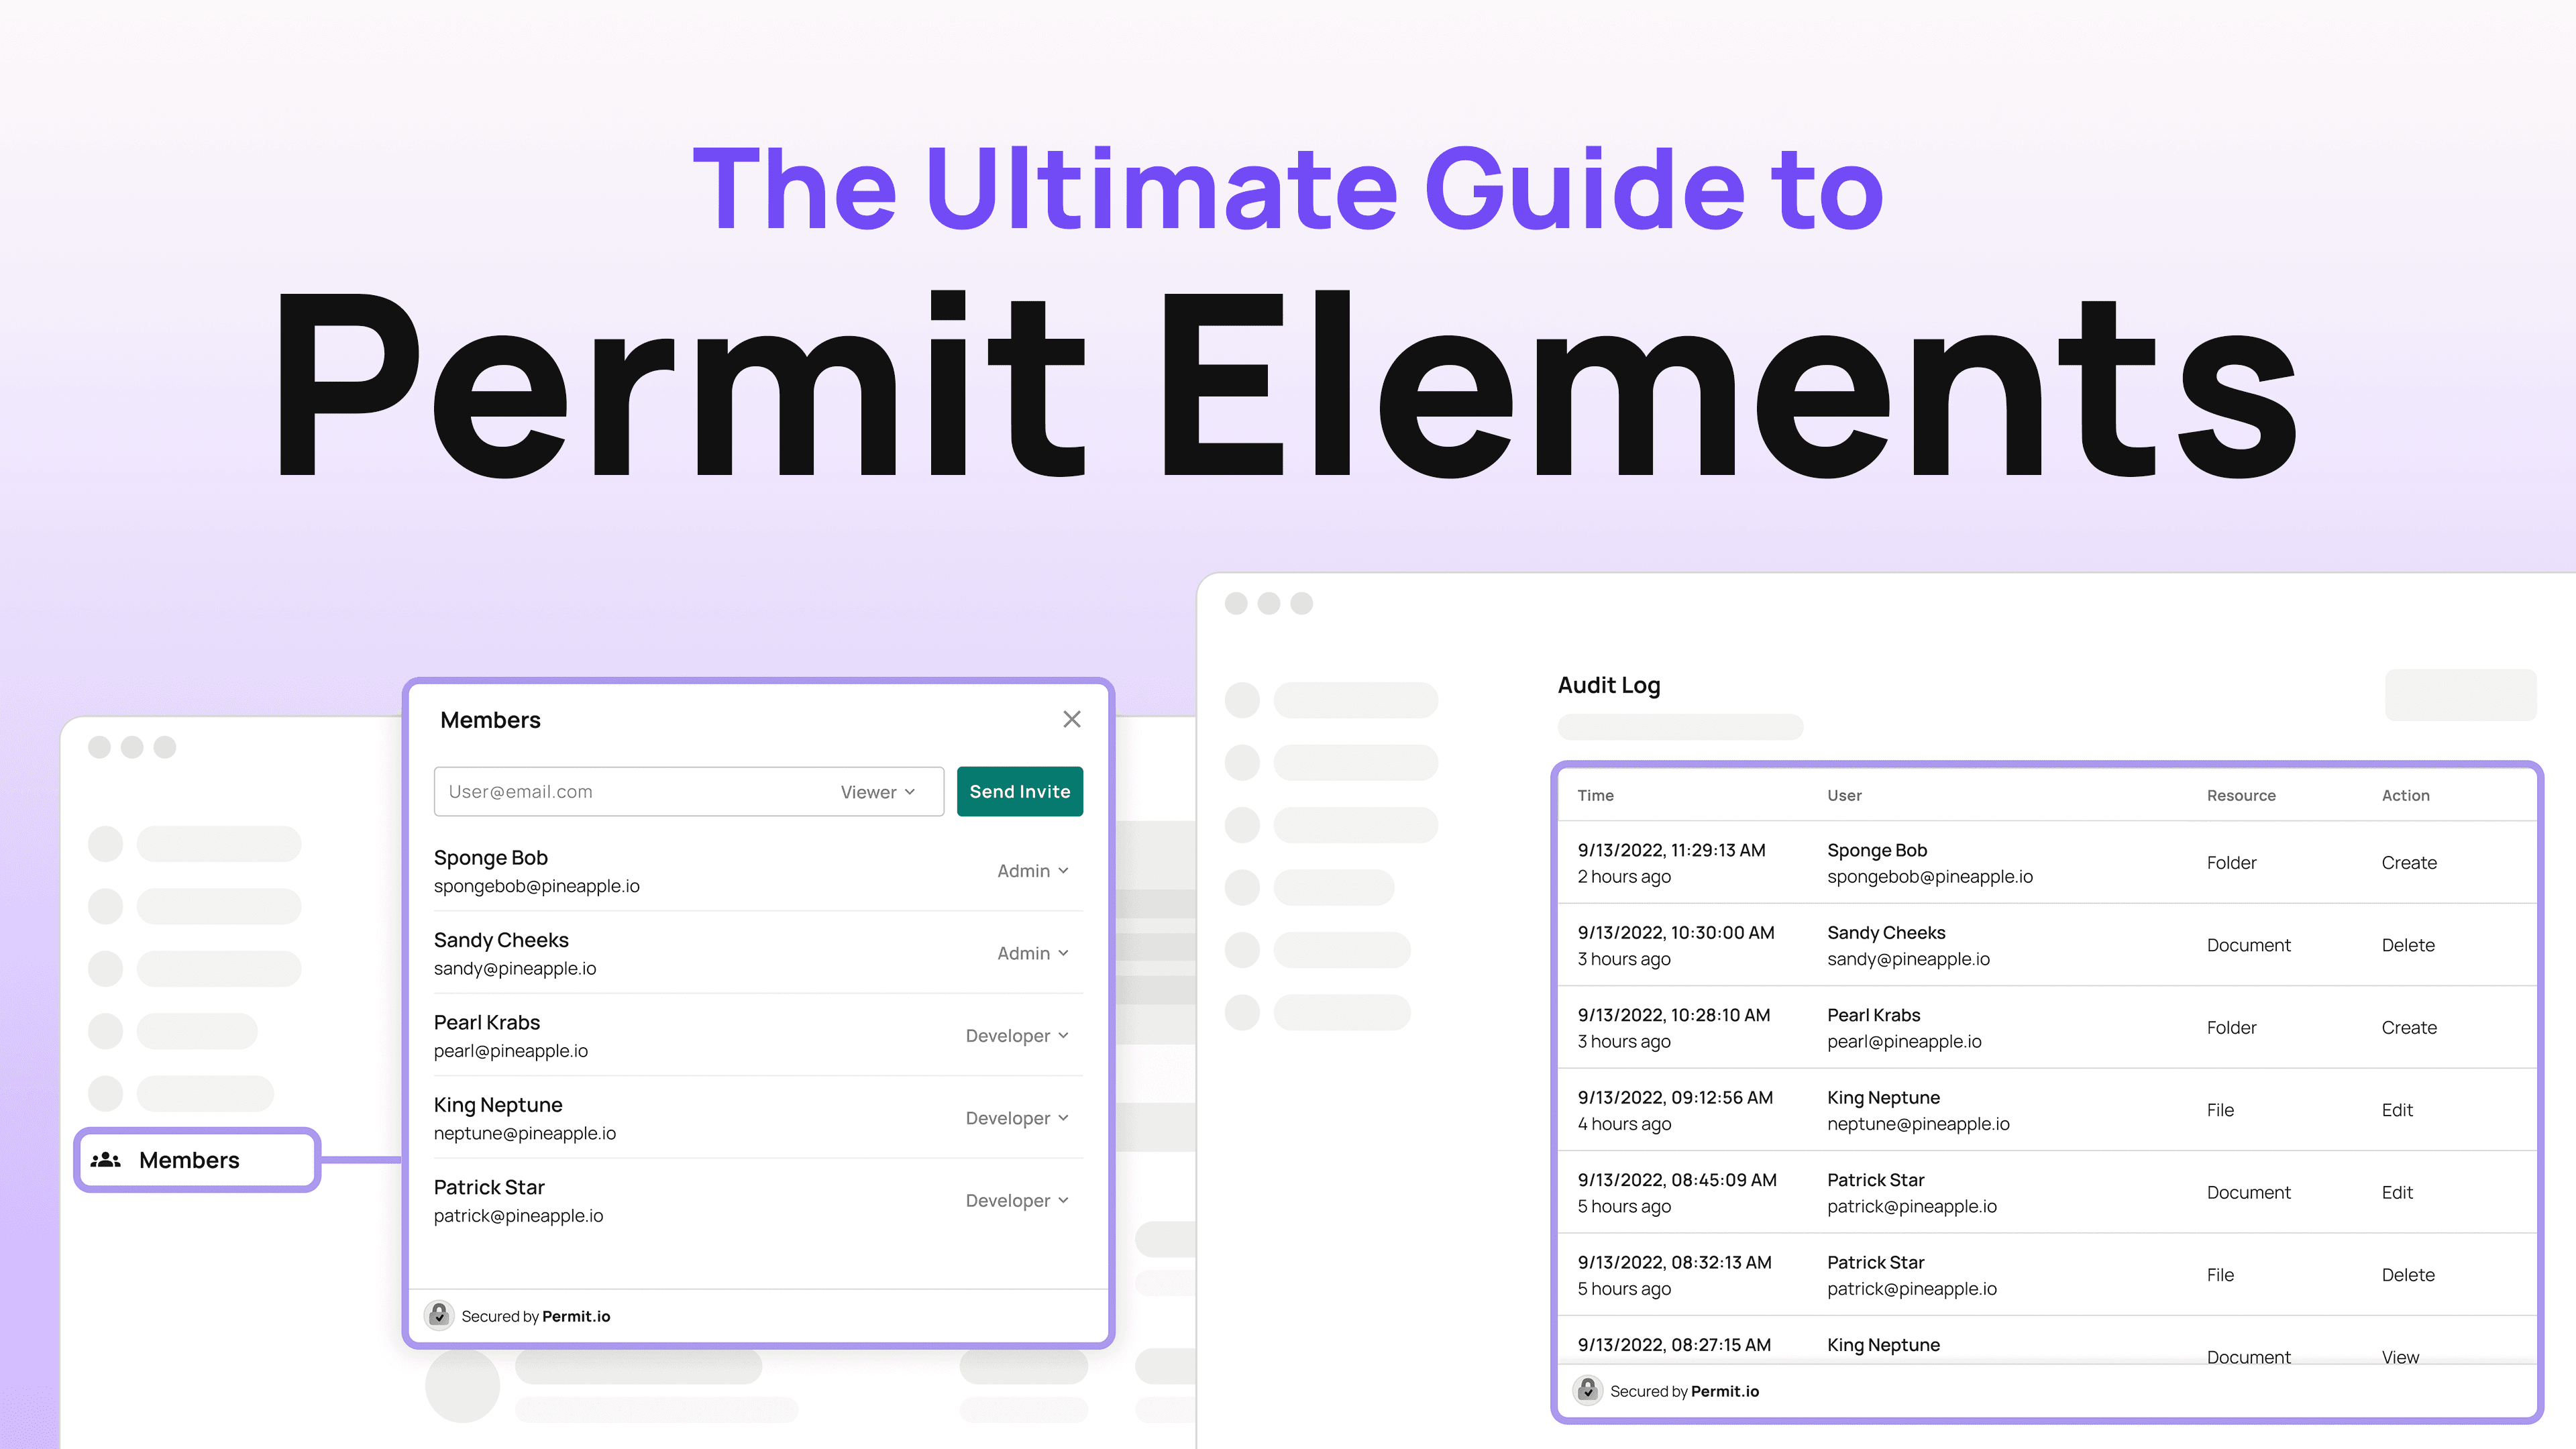 The Ultimate Guide to Permit Elements